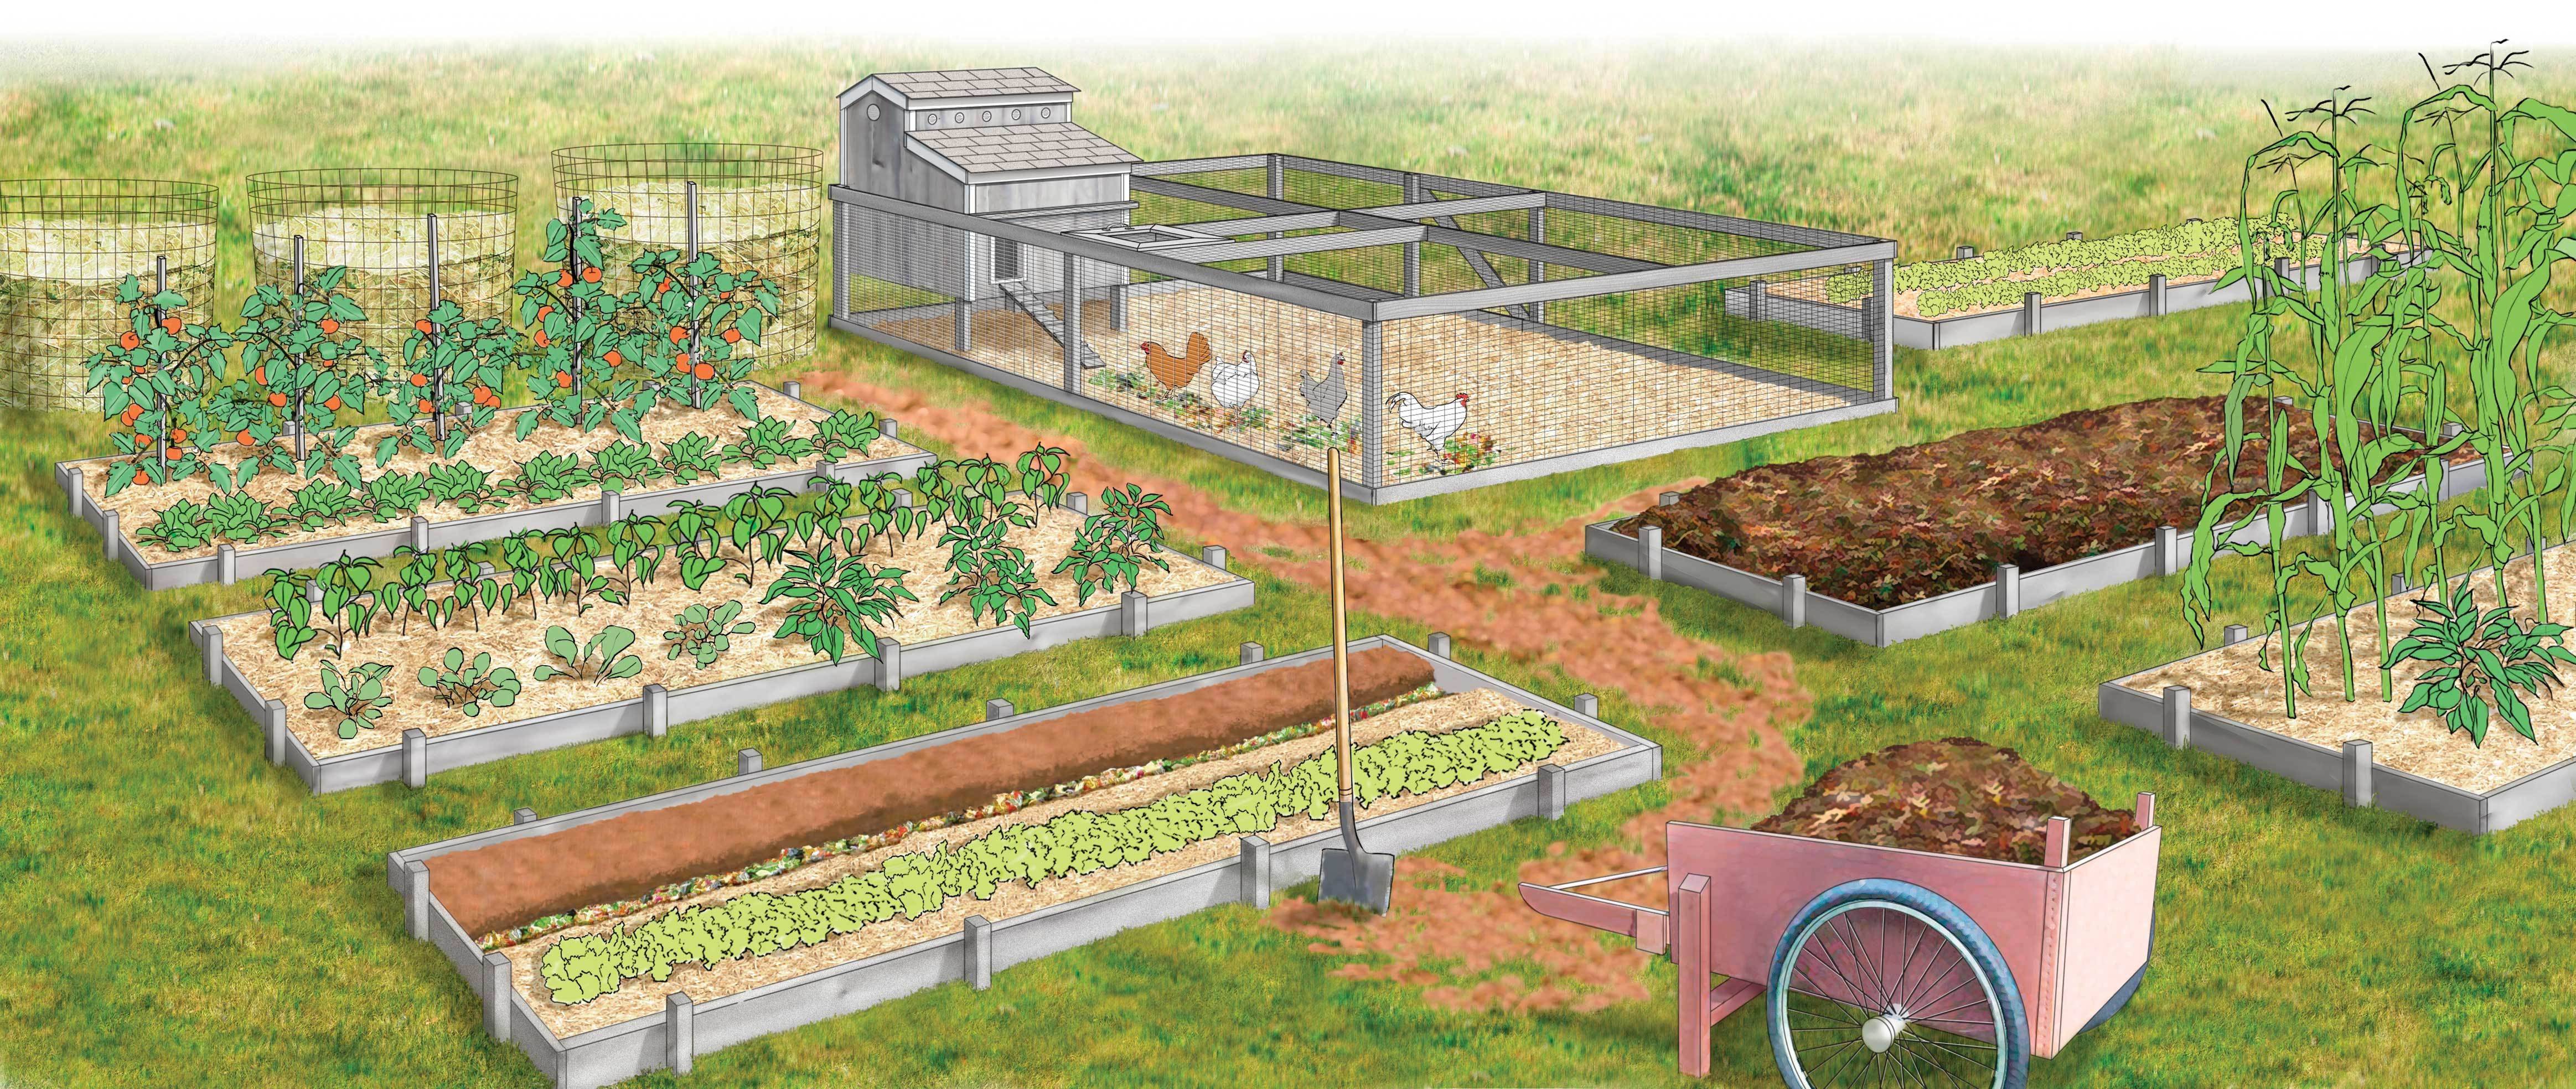 Permaculture Homestead Homesteading Organic Sustainable